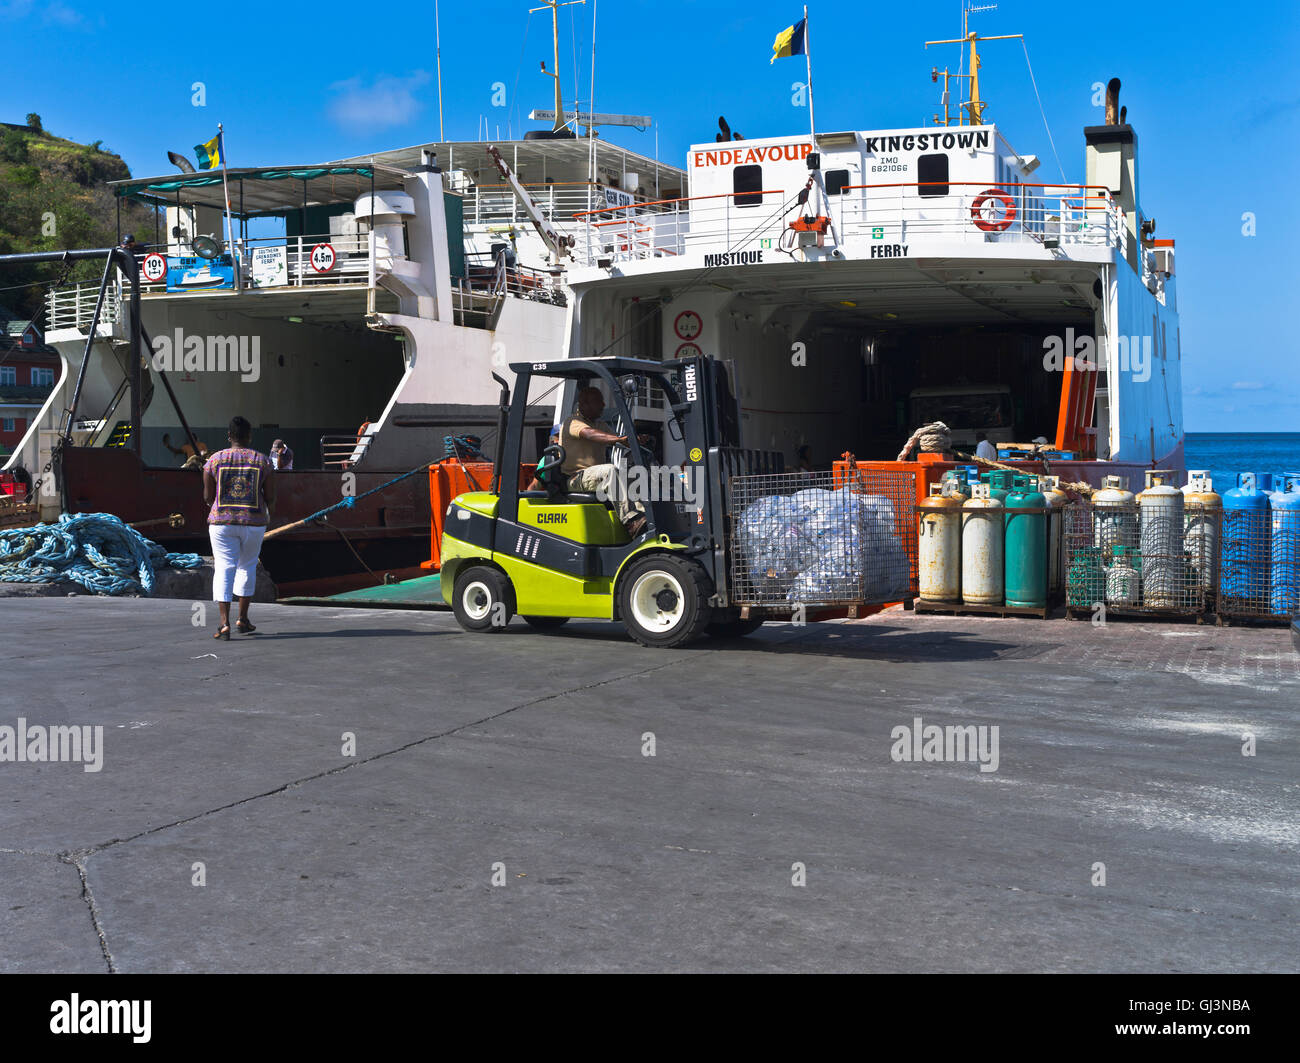 dh Kingstown ST VINCENT CARIBBEAN Inter island ferry terminal loading two ferries cargo forklift truck boat Stock Photo